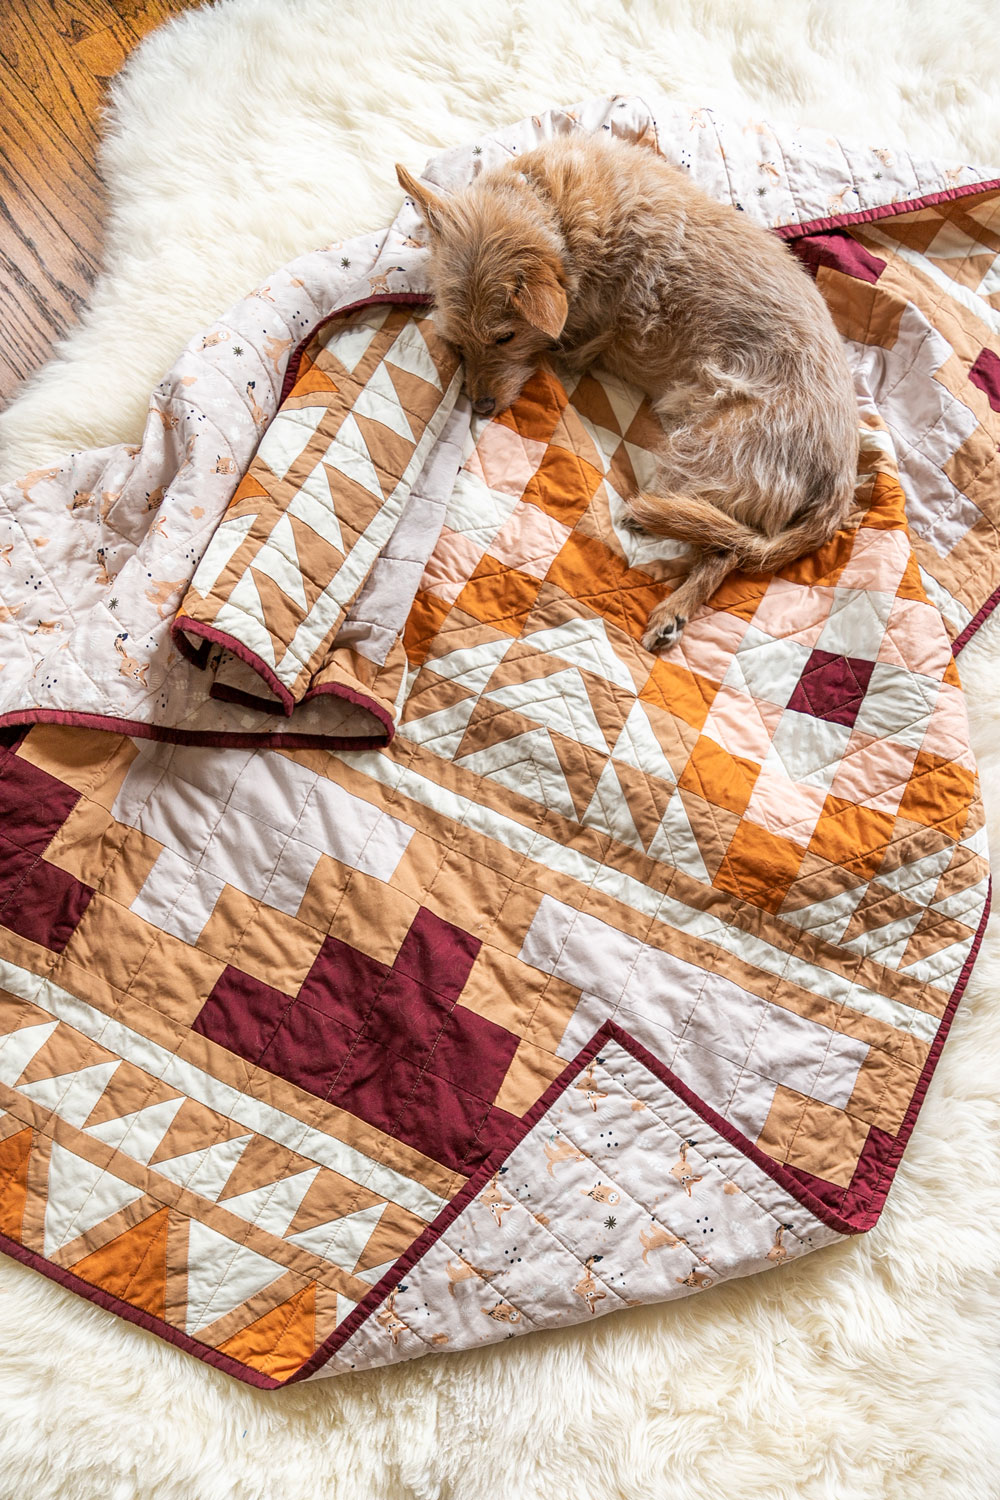 Be inspired by colors of the desert and make your own Mosaic quilt. With warm solid fabrics, this quilt pattern looks modern and timeless! suzyquilts.com #quiltkit #quiltpattern